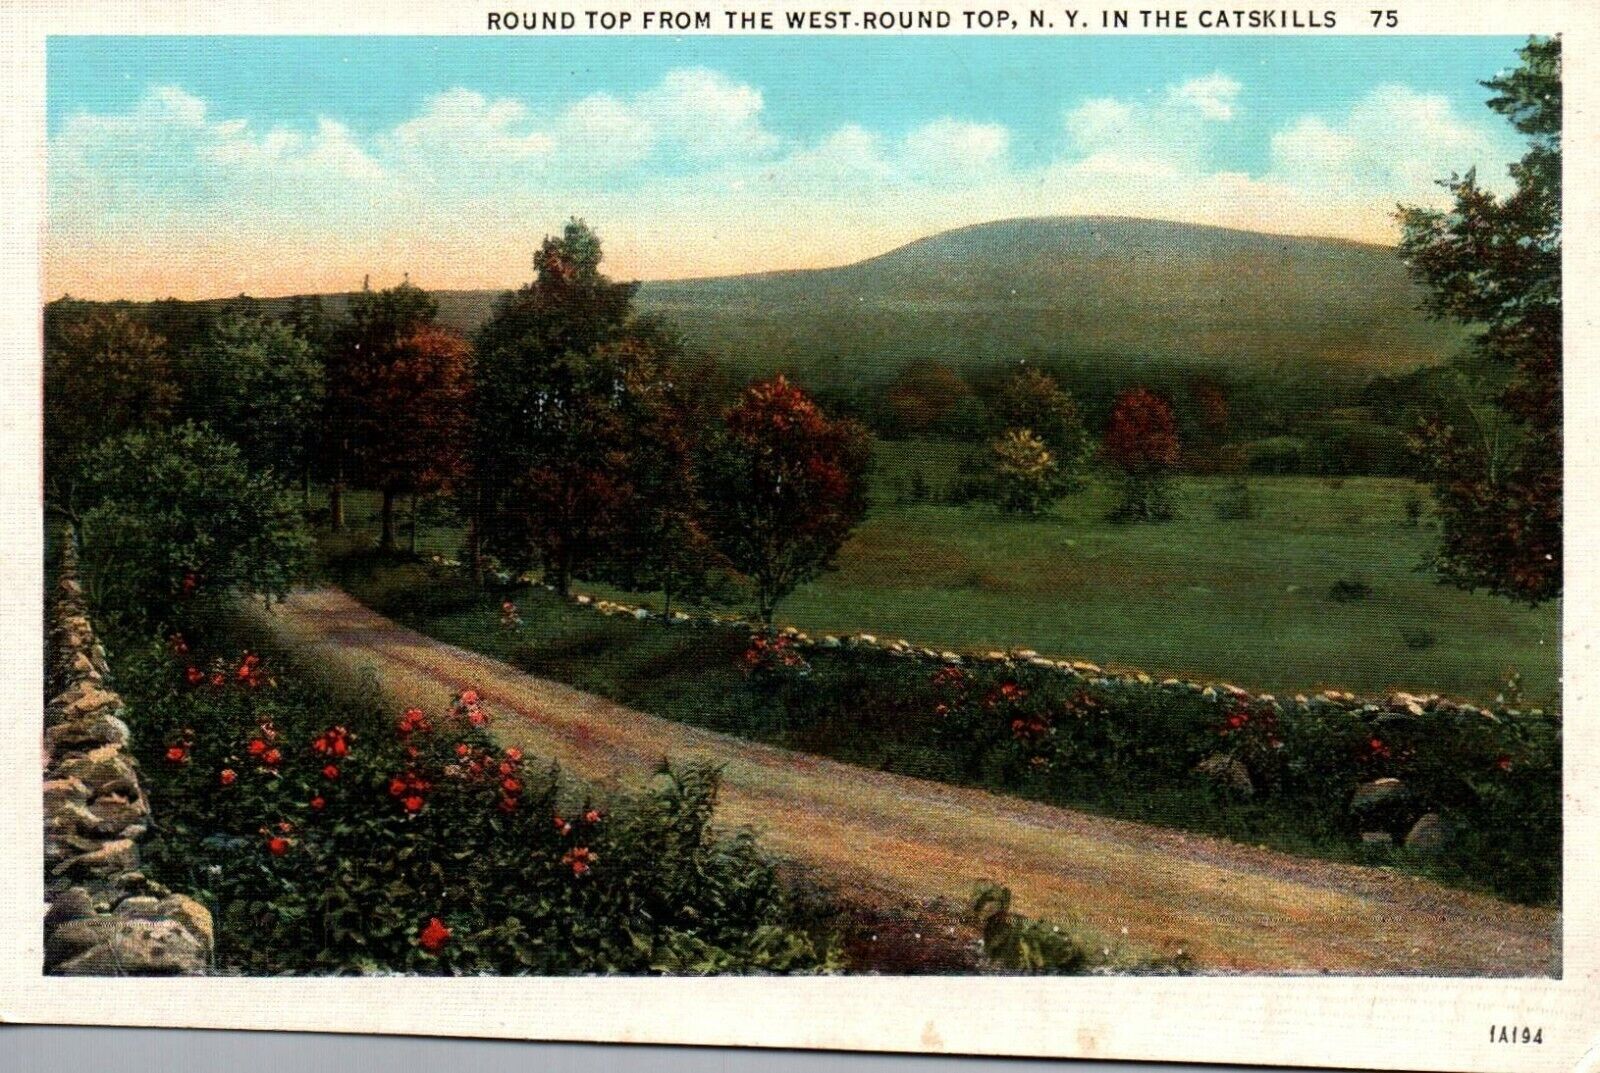 Catskills Mountains New York NY Round Top From West Round Top Vintage Postcard